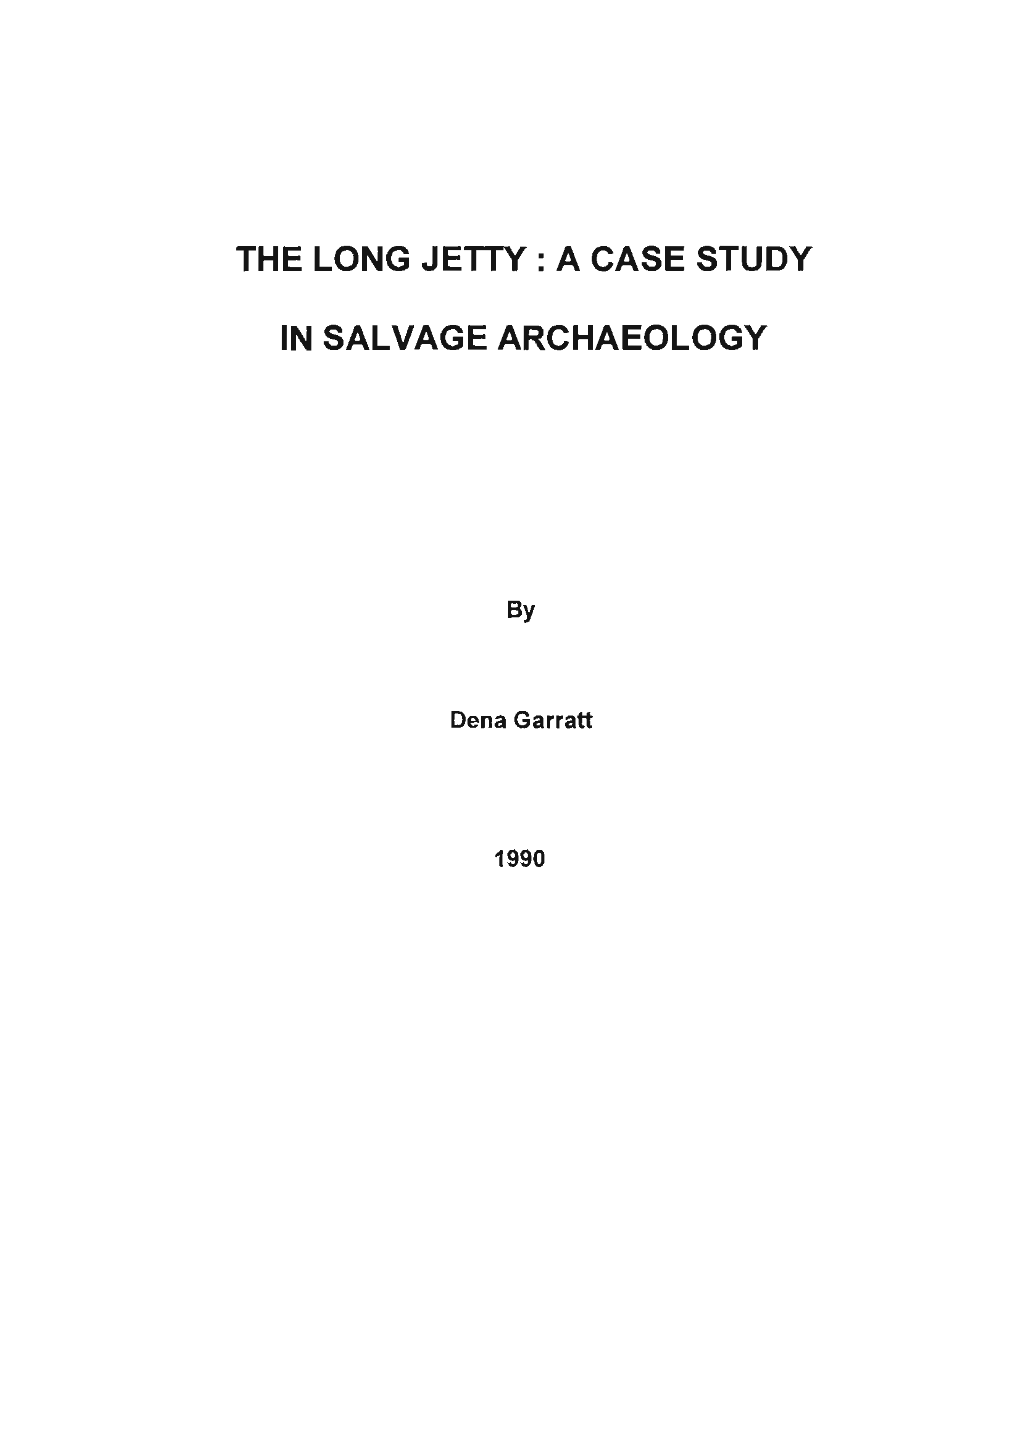 The Long Jetty: a Case Study